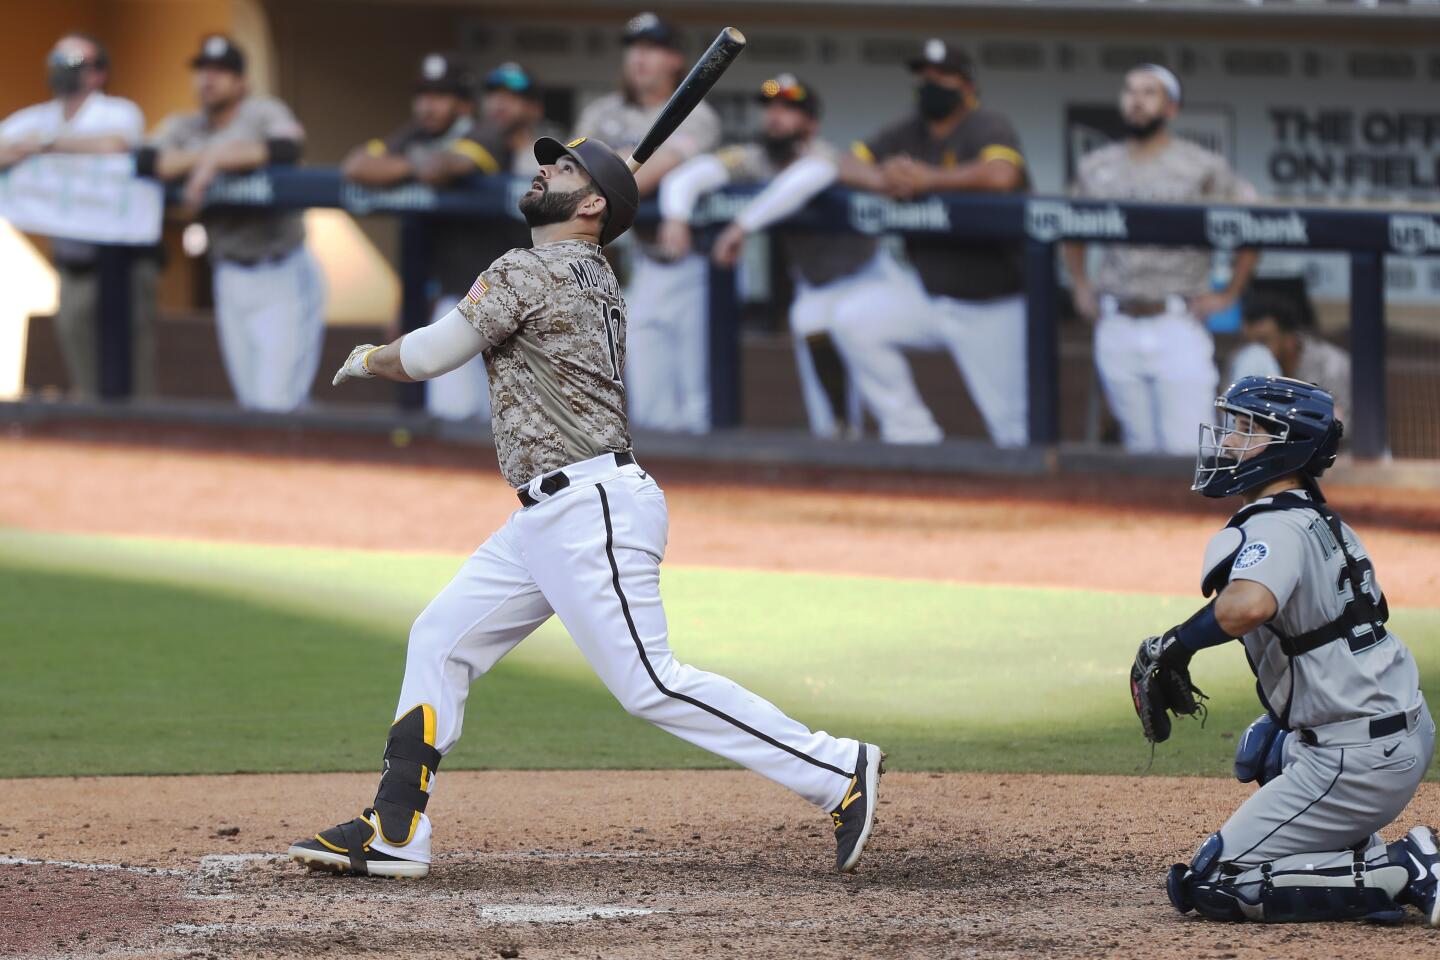 Padres Pics: San Diego clinches playoff berth - FriarWire